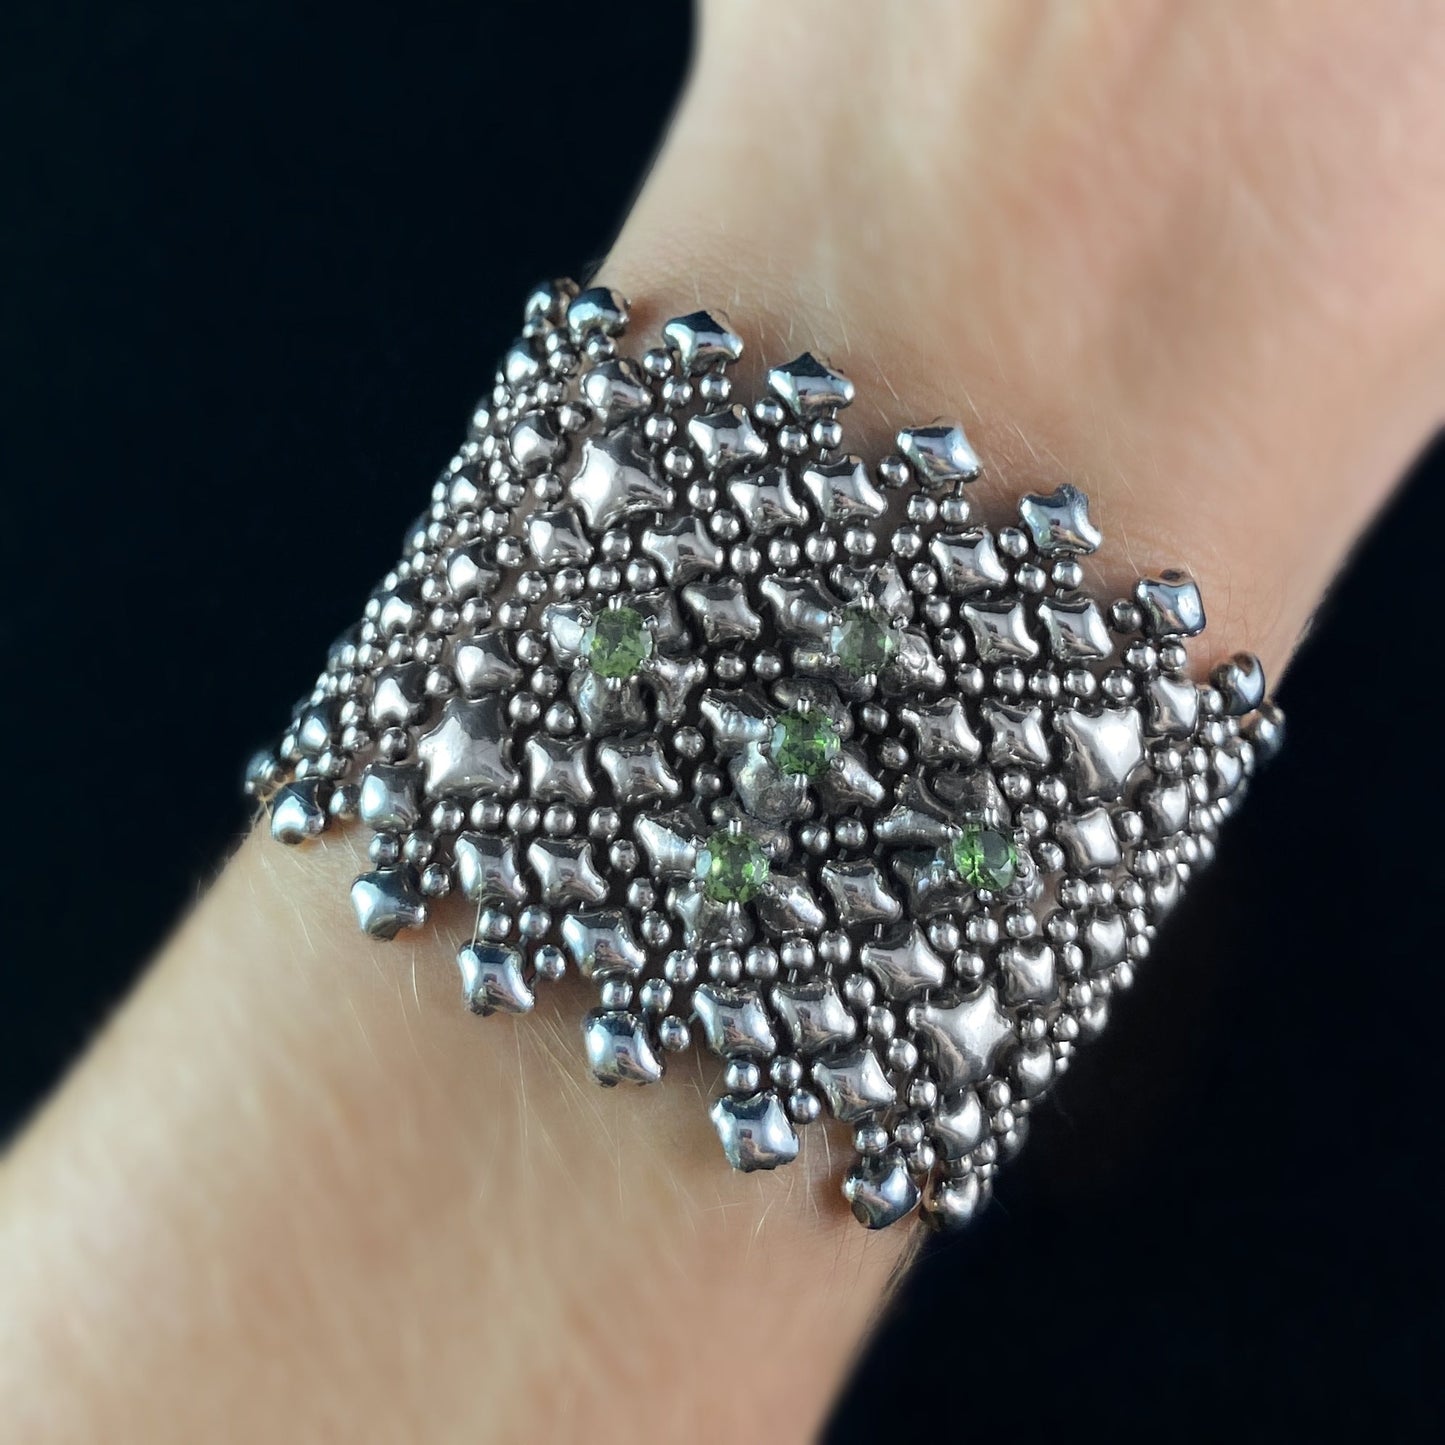 SG Liquid Metal Bracelet - 1.75 inch Wide Silver with Green